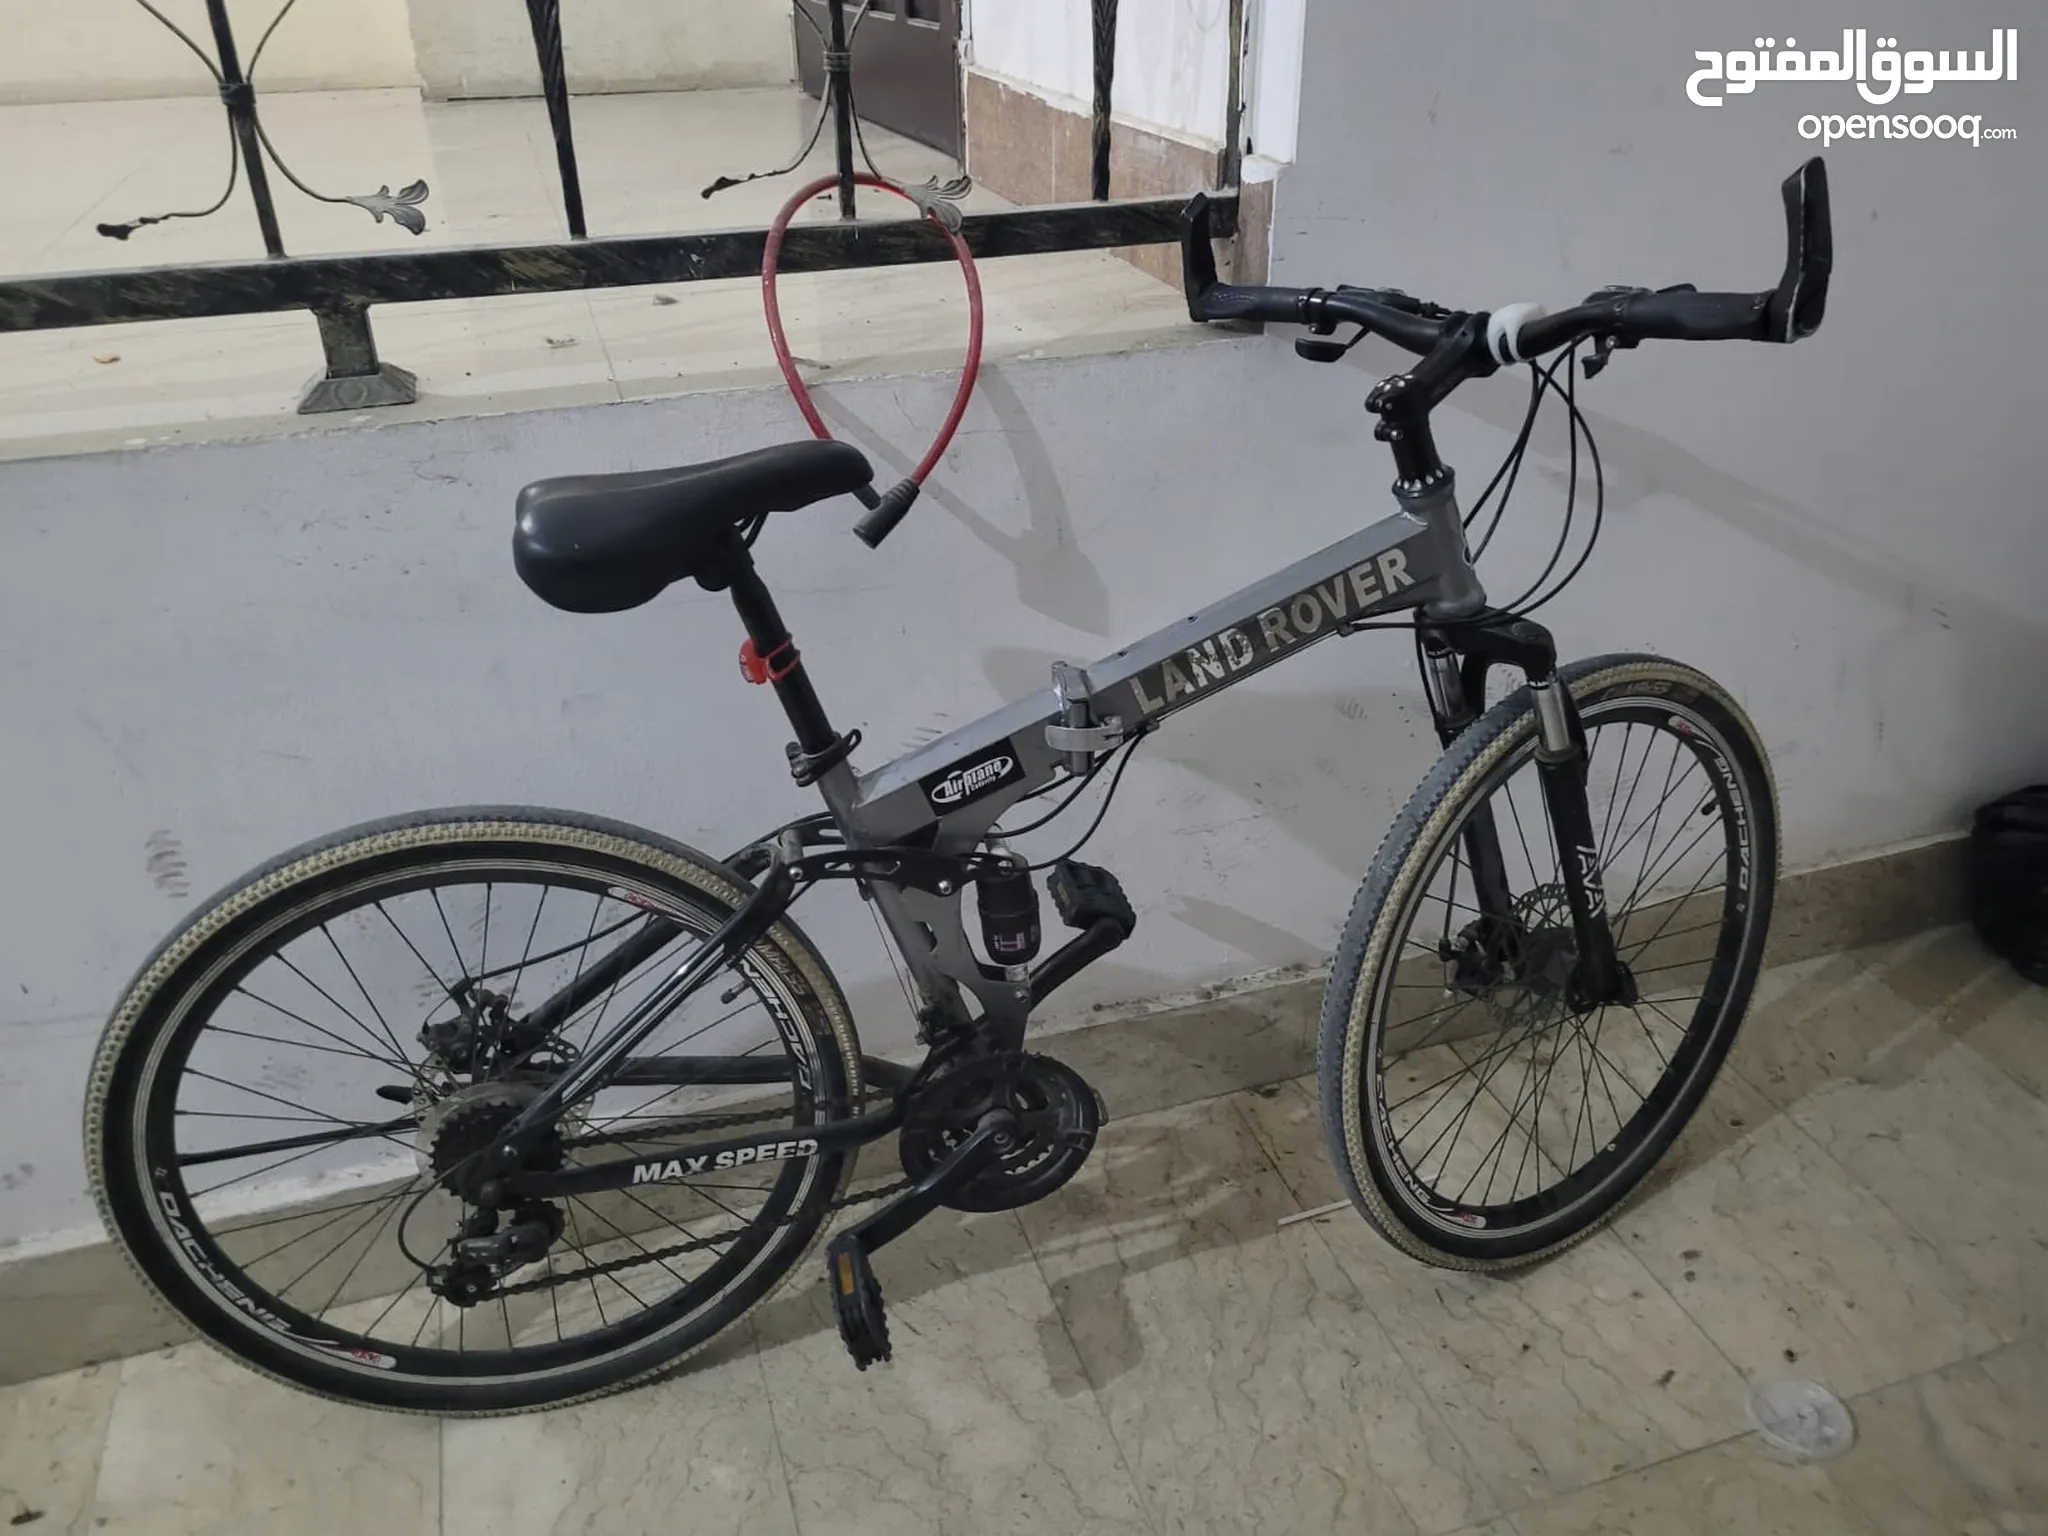 Affordable Bicycles & Accessories for Sale or Rent in UAE - Enjoy Outdoors  with Gear!